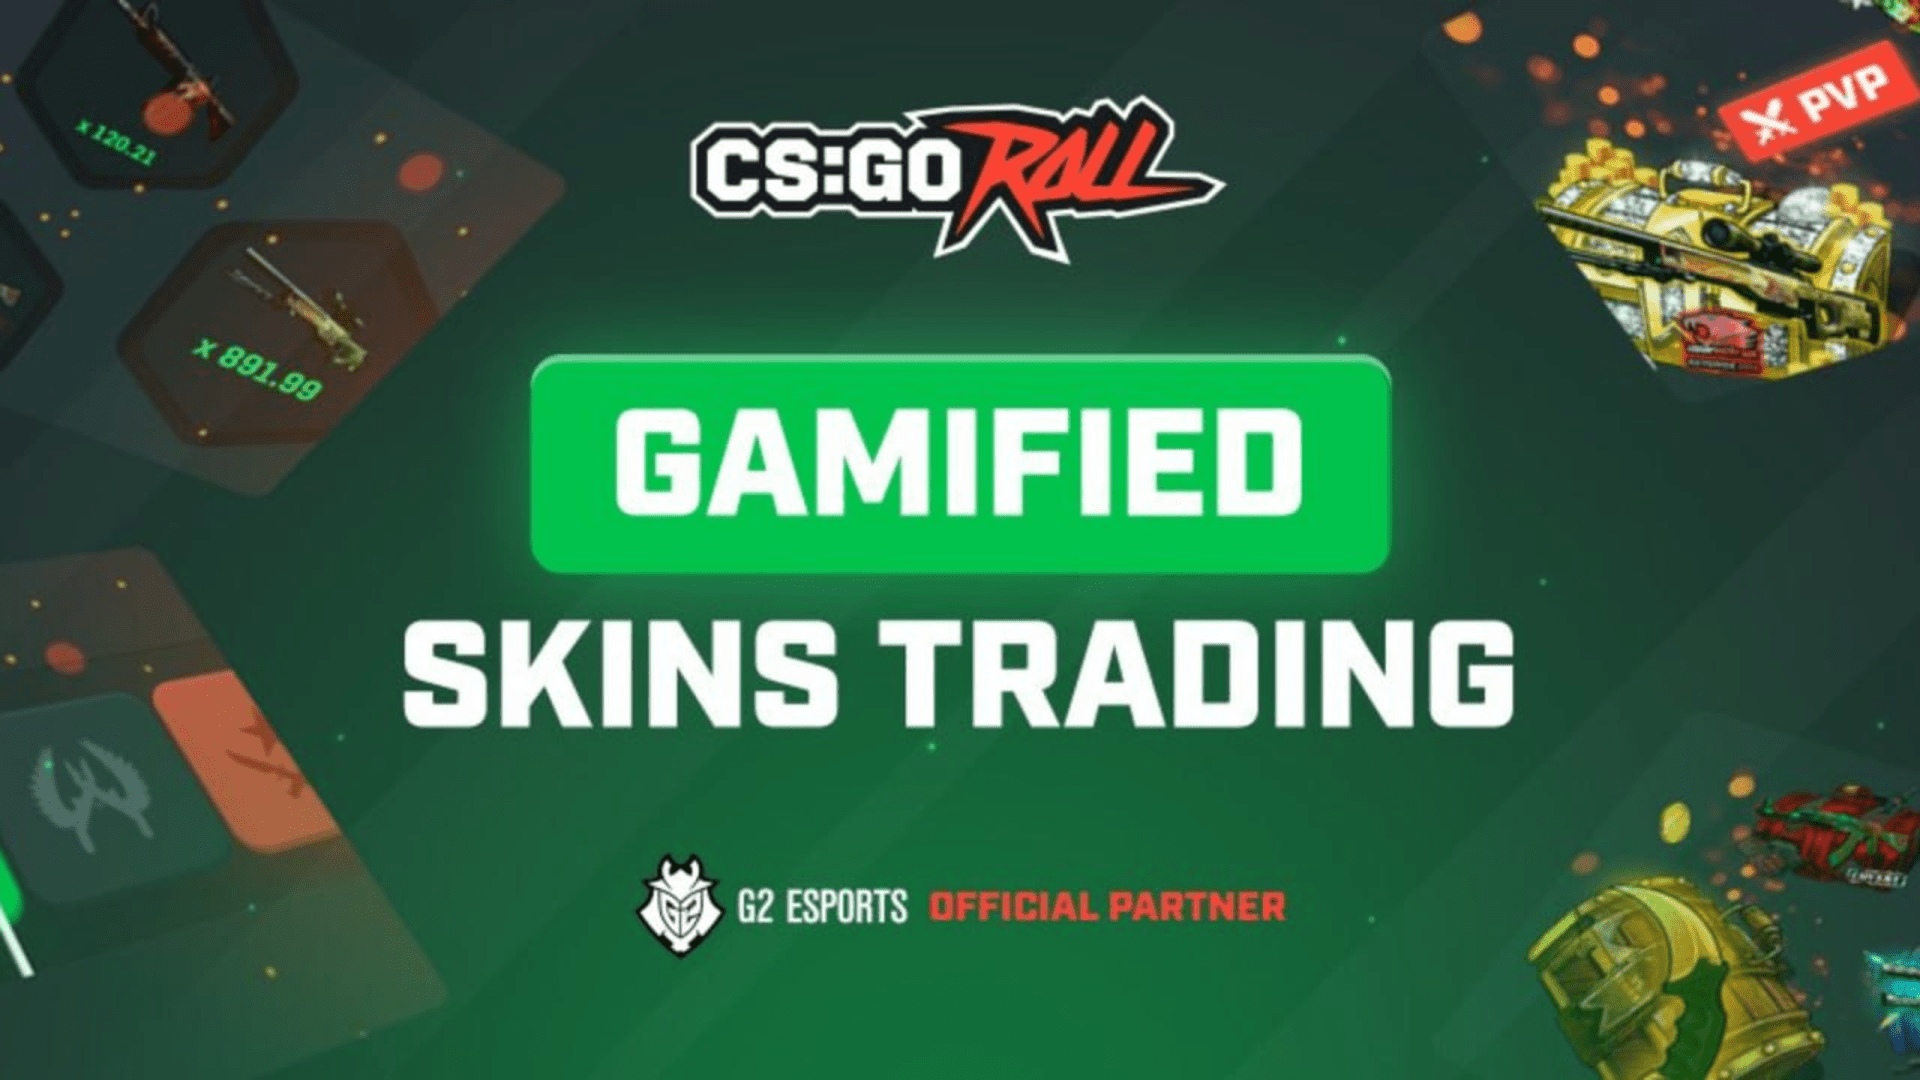 CSGORoll: Elevating Counter-Strike Experience By Uniting Skins, Games, and Rewards